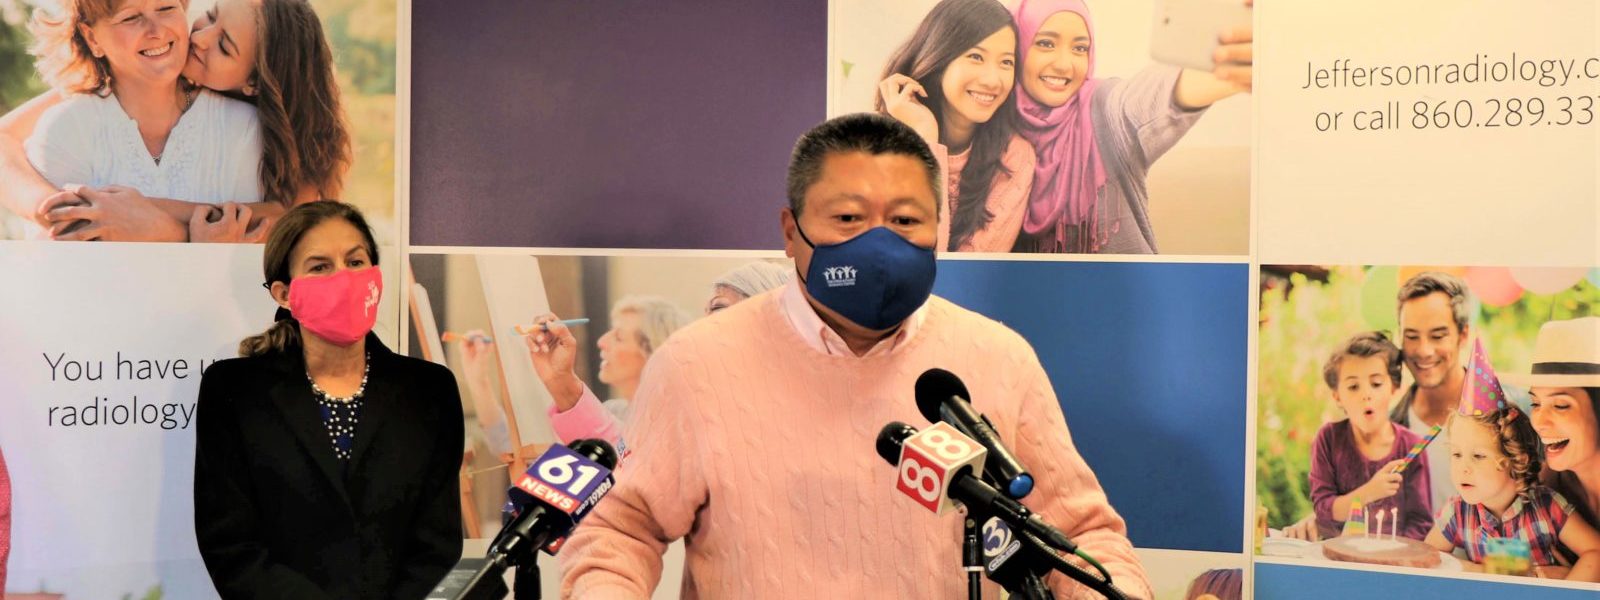 Sen. Tony Hwang Leads on Women’s Health Issues: Breast Health and Ovarian Cancer Screenings